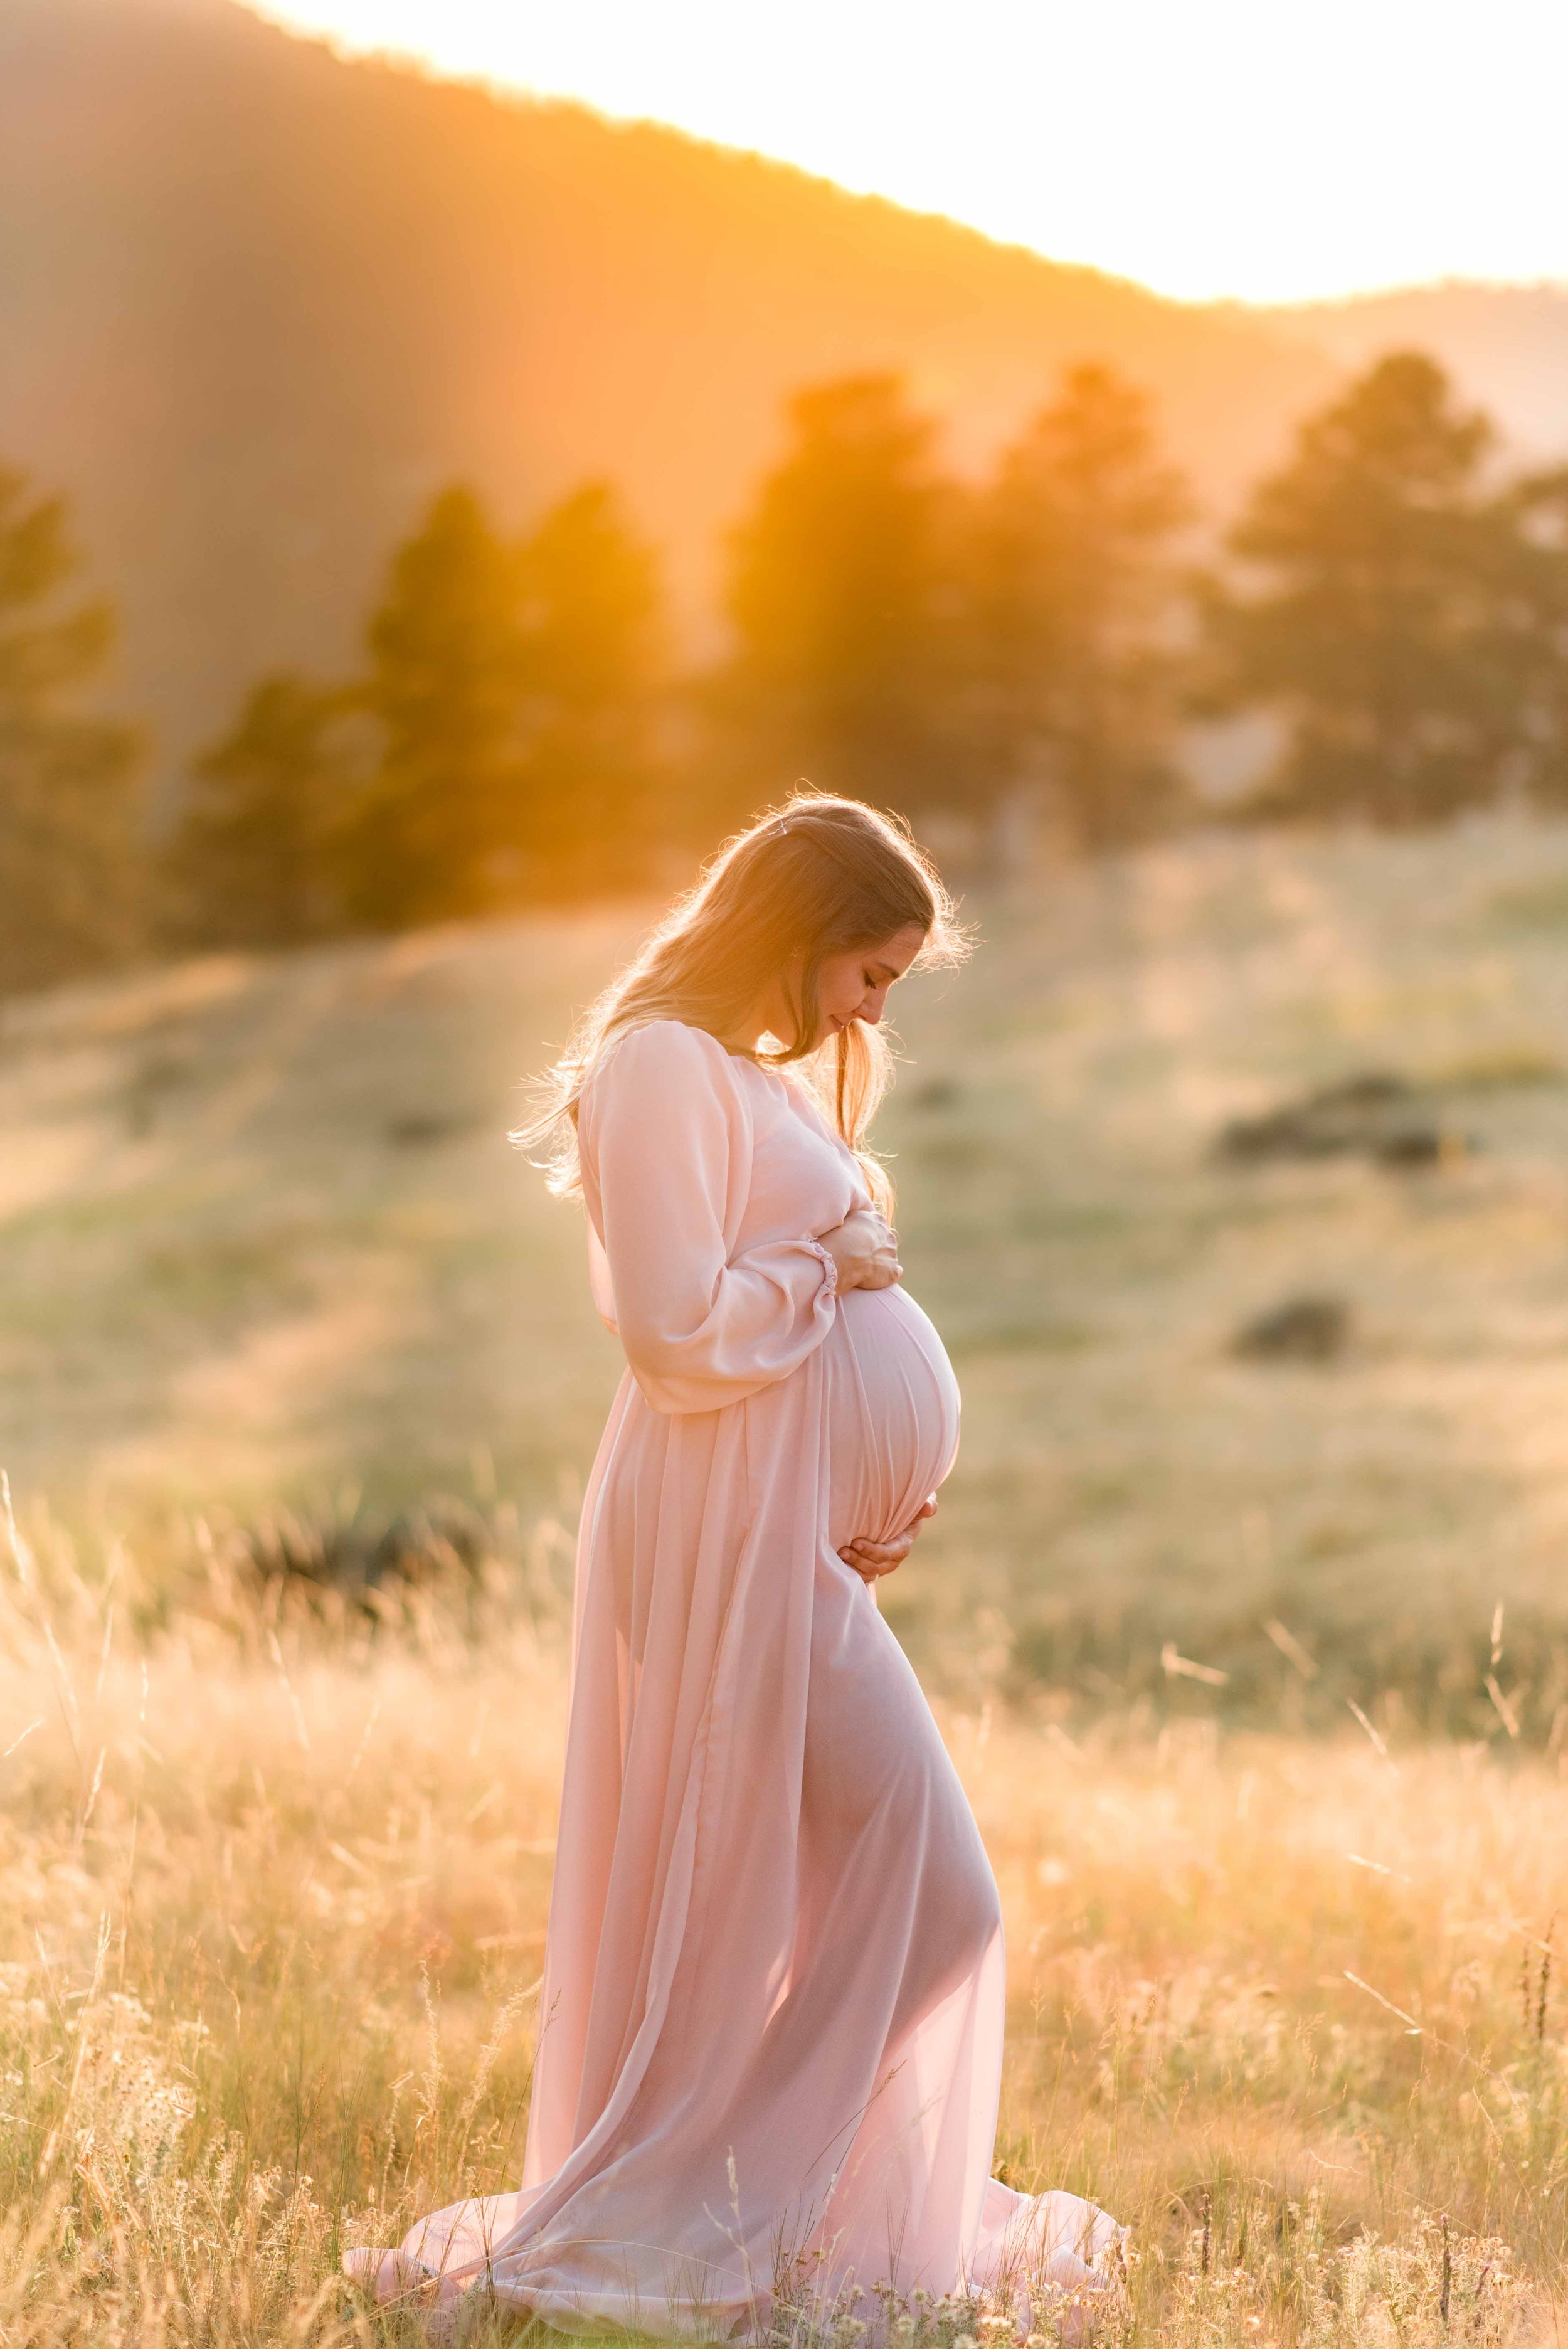 When Should You Take Maternity Photos?